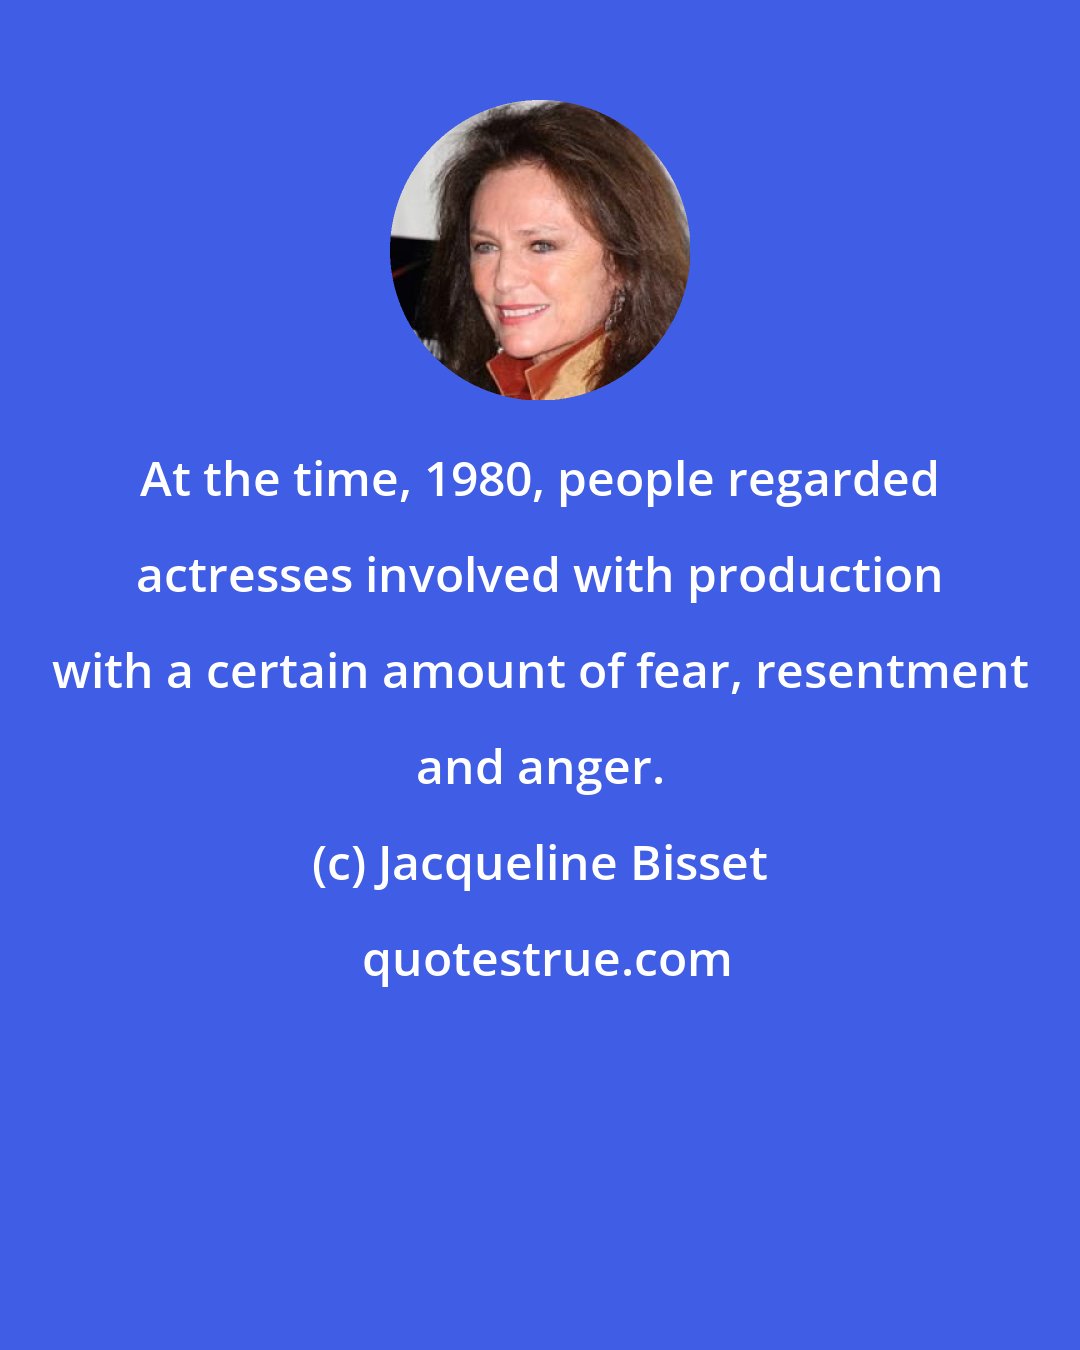 Jacqueline Bisset: At the time, 1980, people regarded actresses involved with production with a certain amount of fear, resentment and anger.